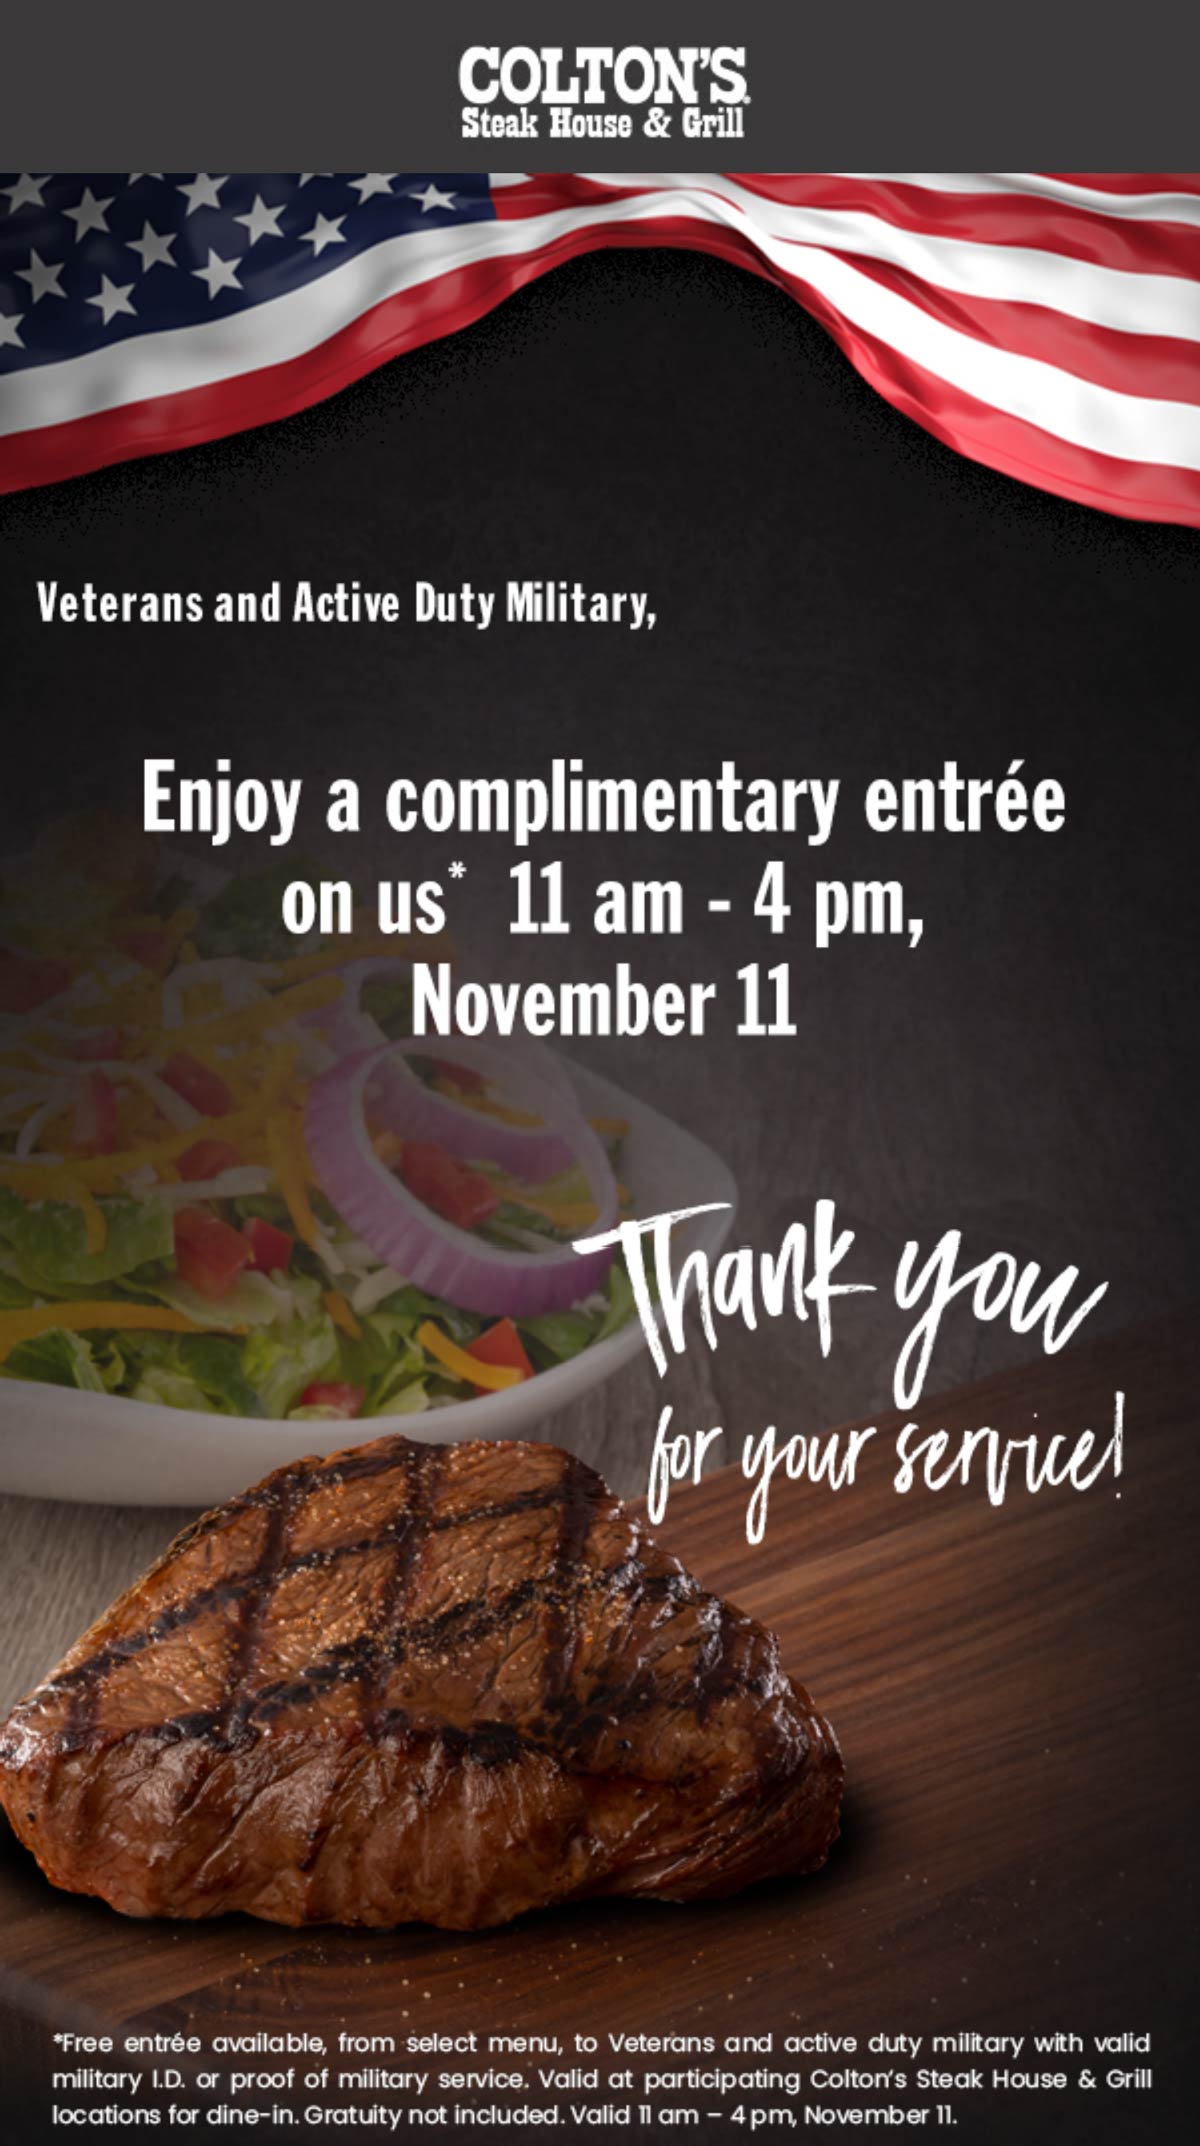 Coltons restaurants Coupon  Veterans & active enjoy a free entree Thursday at Coltons Steak House & Grill #coltons 